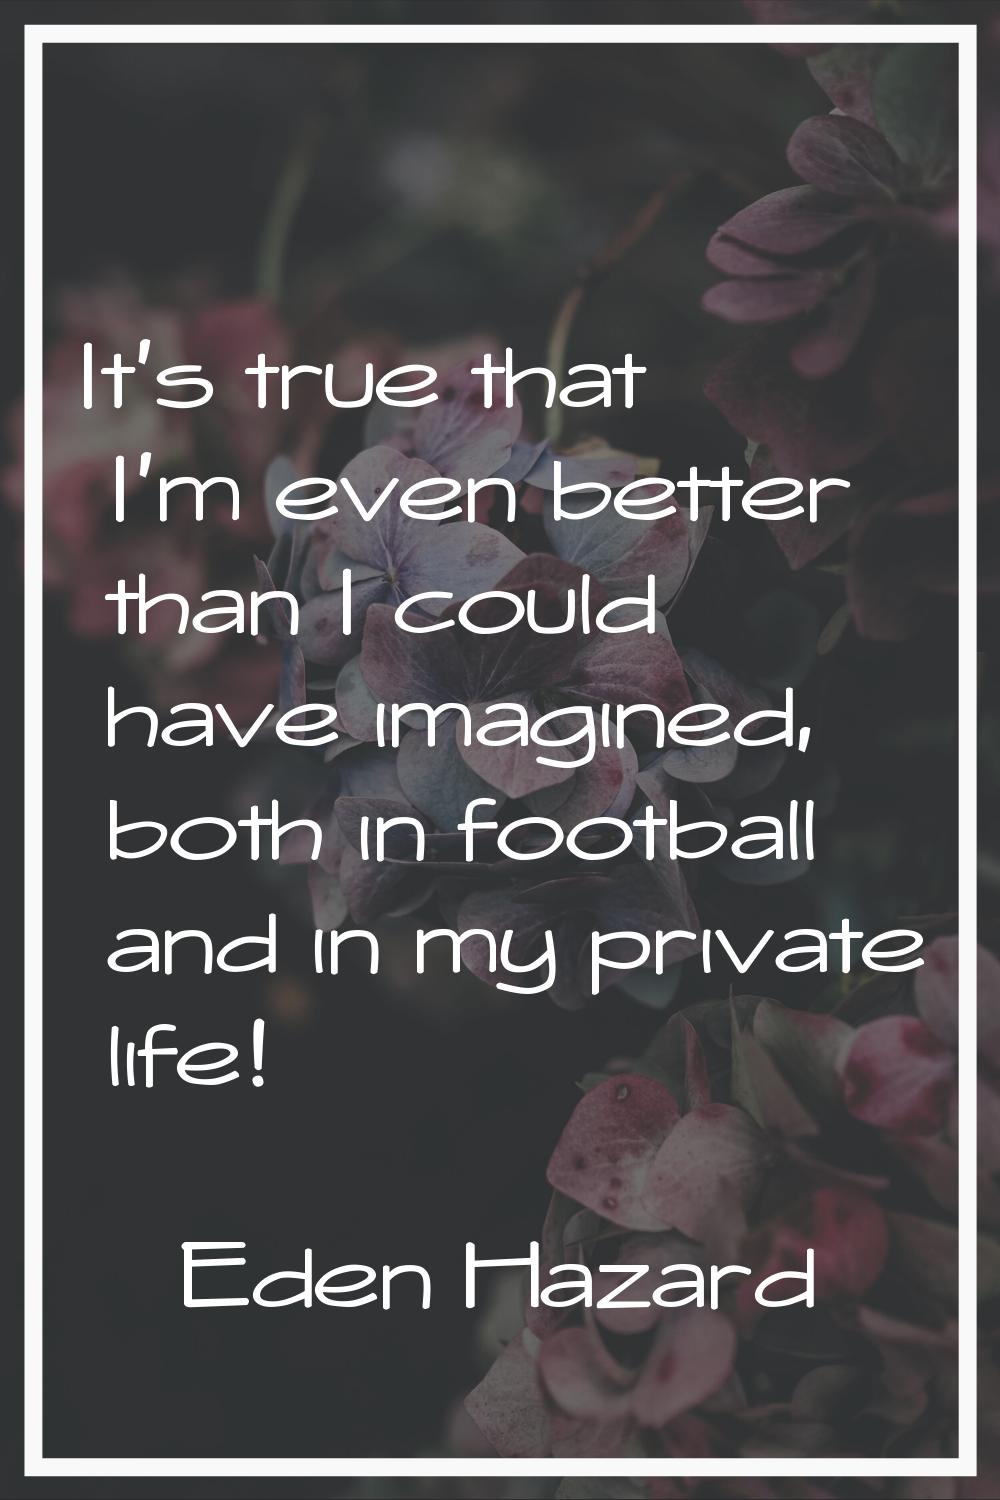 It's true that I'm even better than I could have imagined, both in football and in my private life!